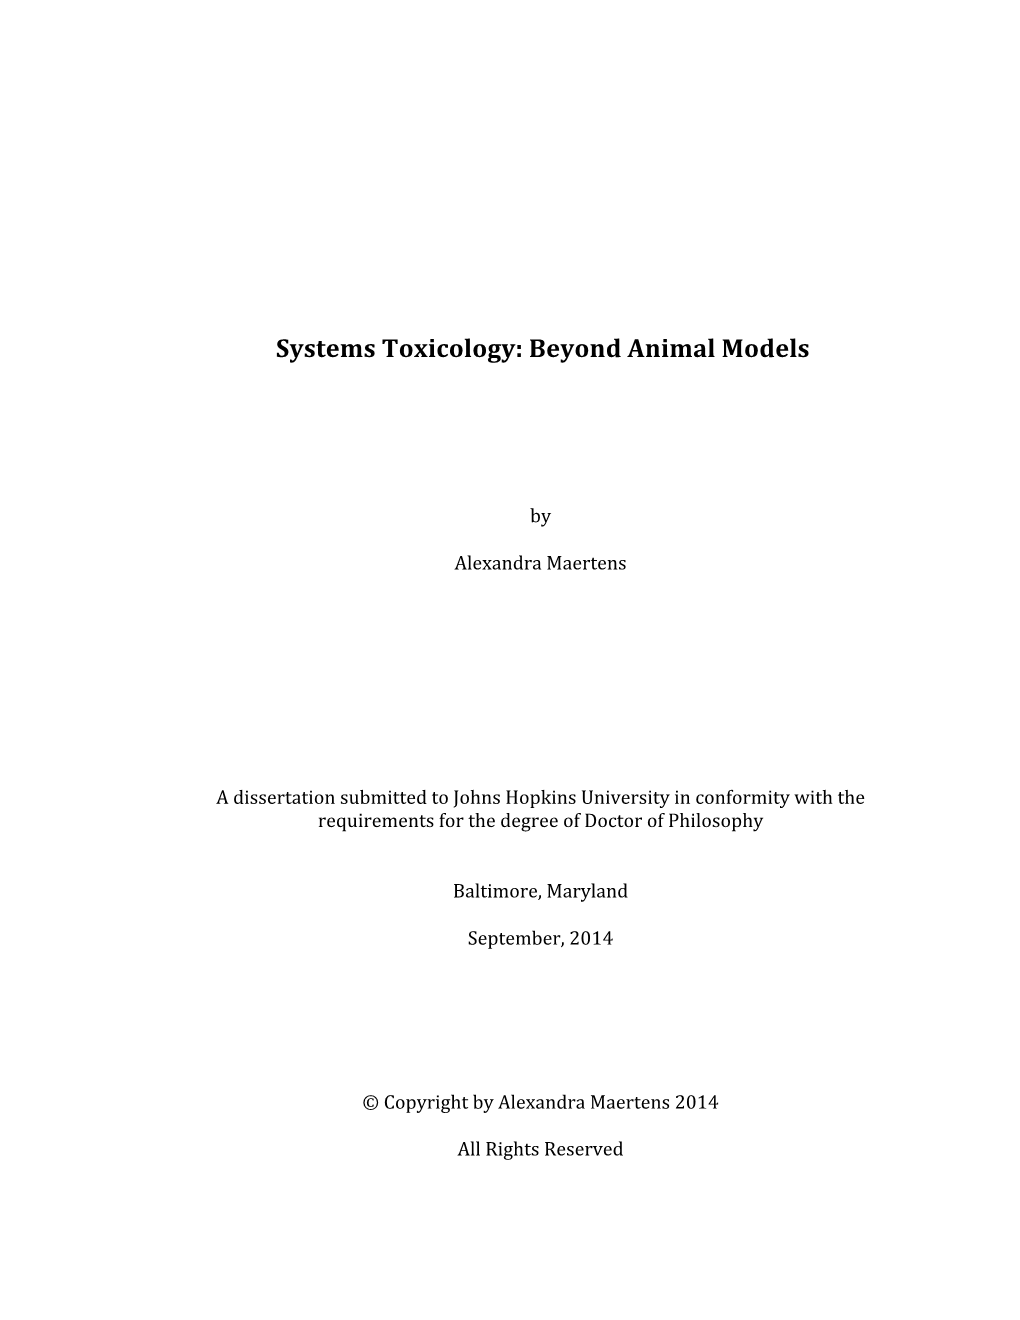 Systems Toxicology: Beyond Animal Models